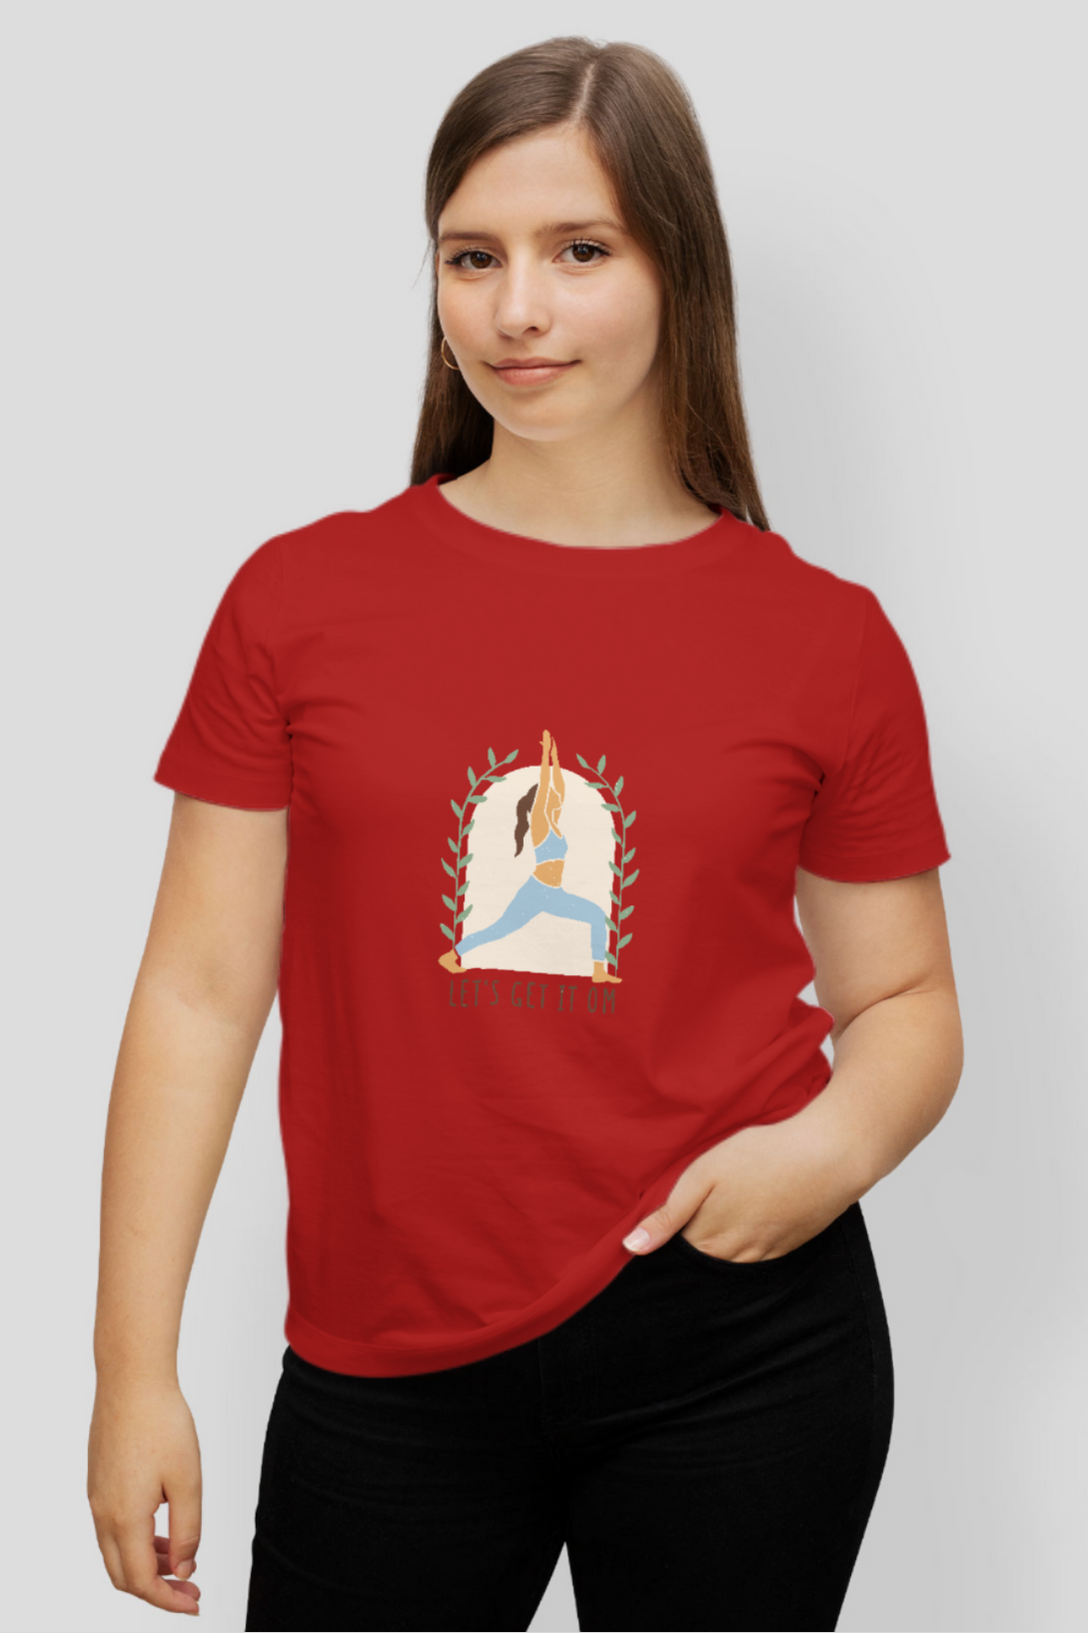 Yoga With Om Printed T-Shirt For Women - WowWaves - 13